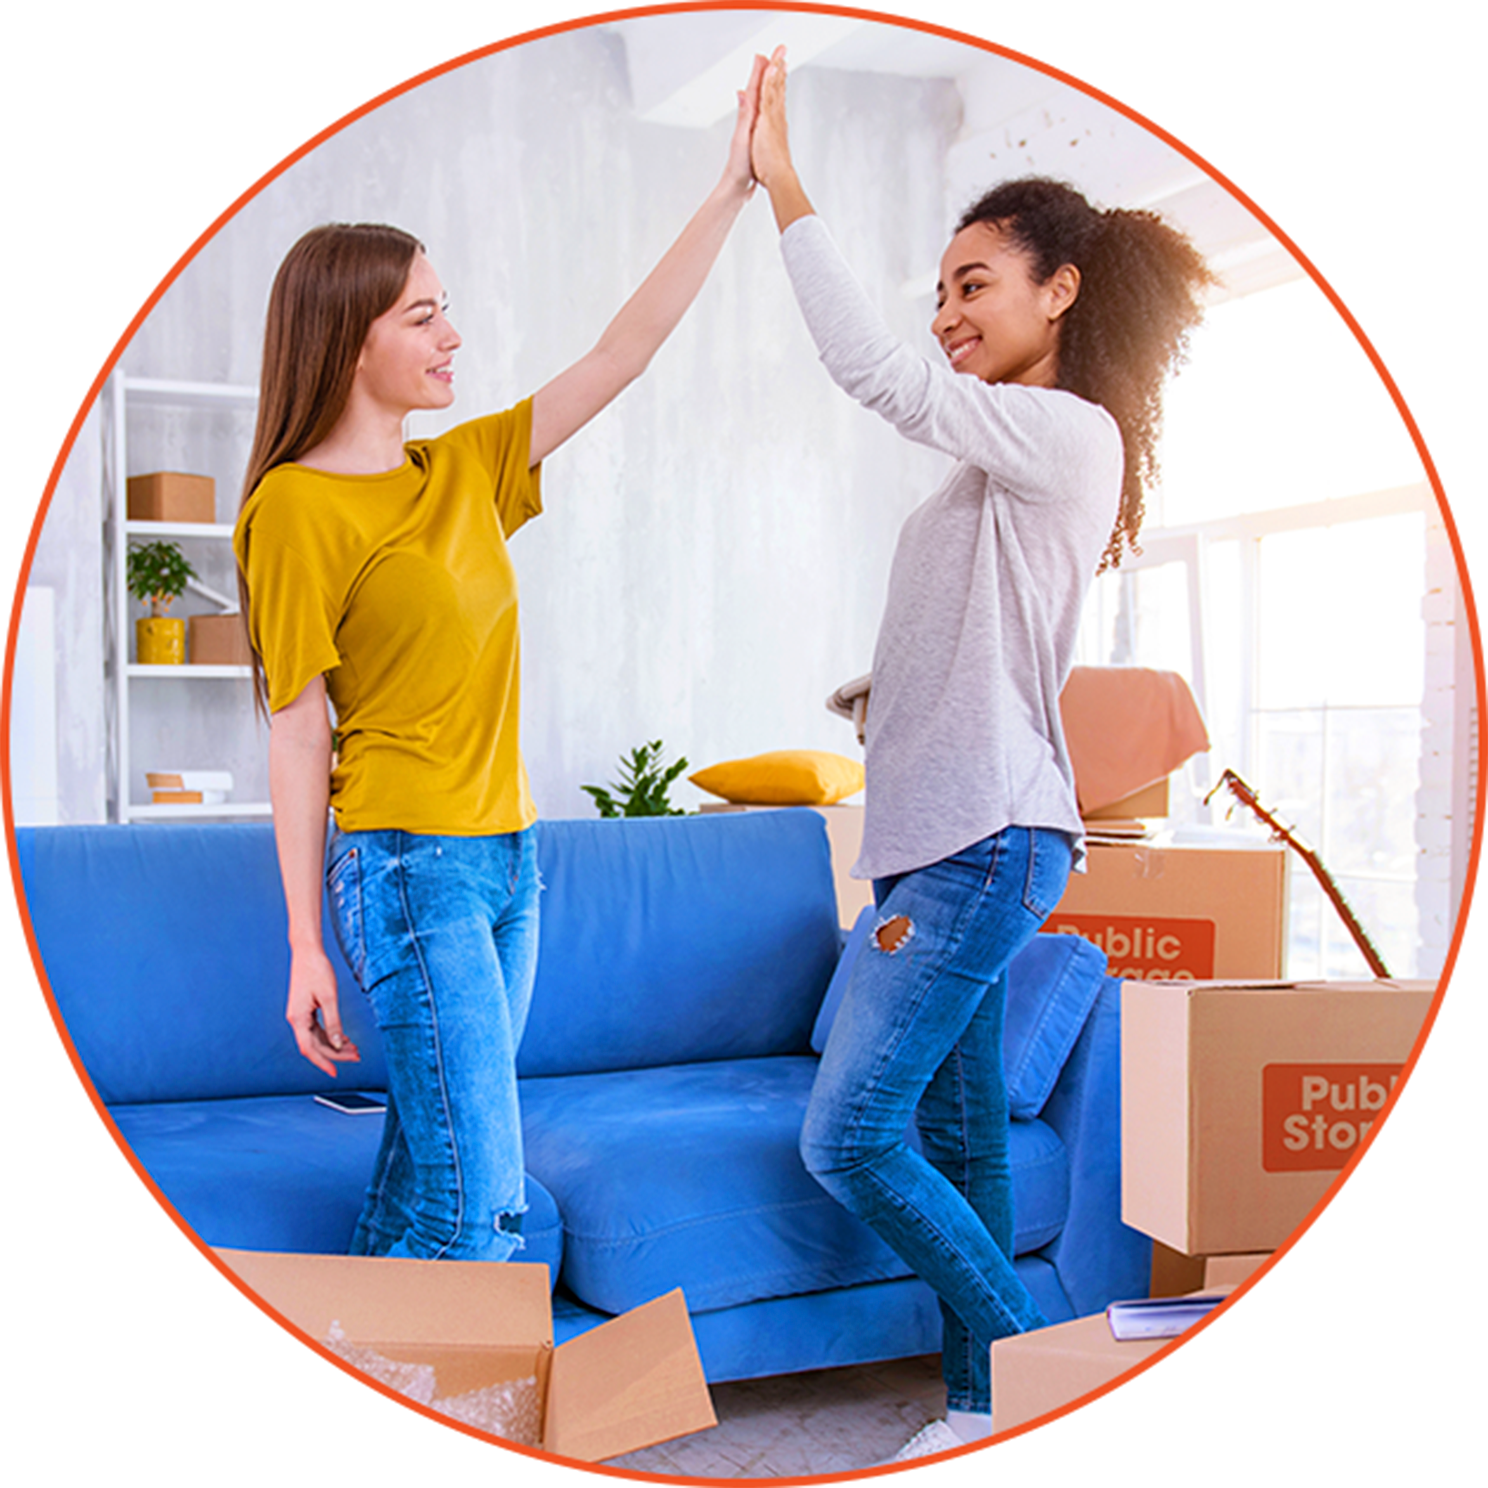 Two young women standing in a living room doing a high-five